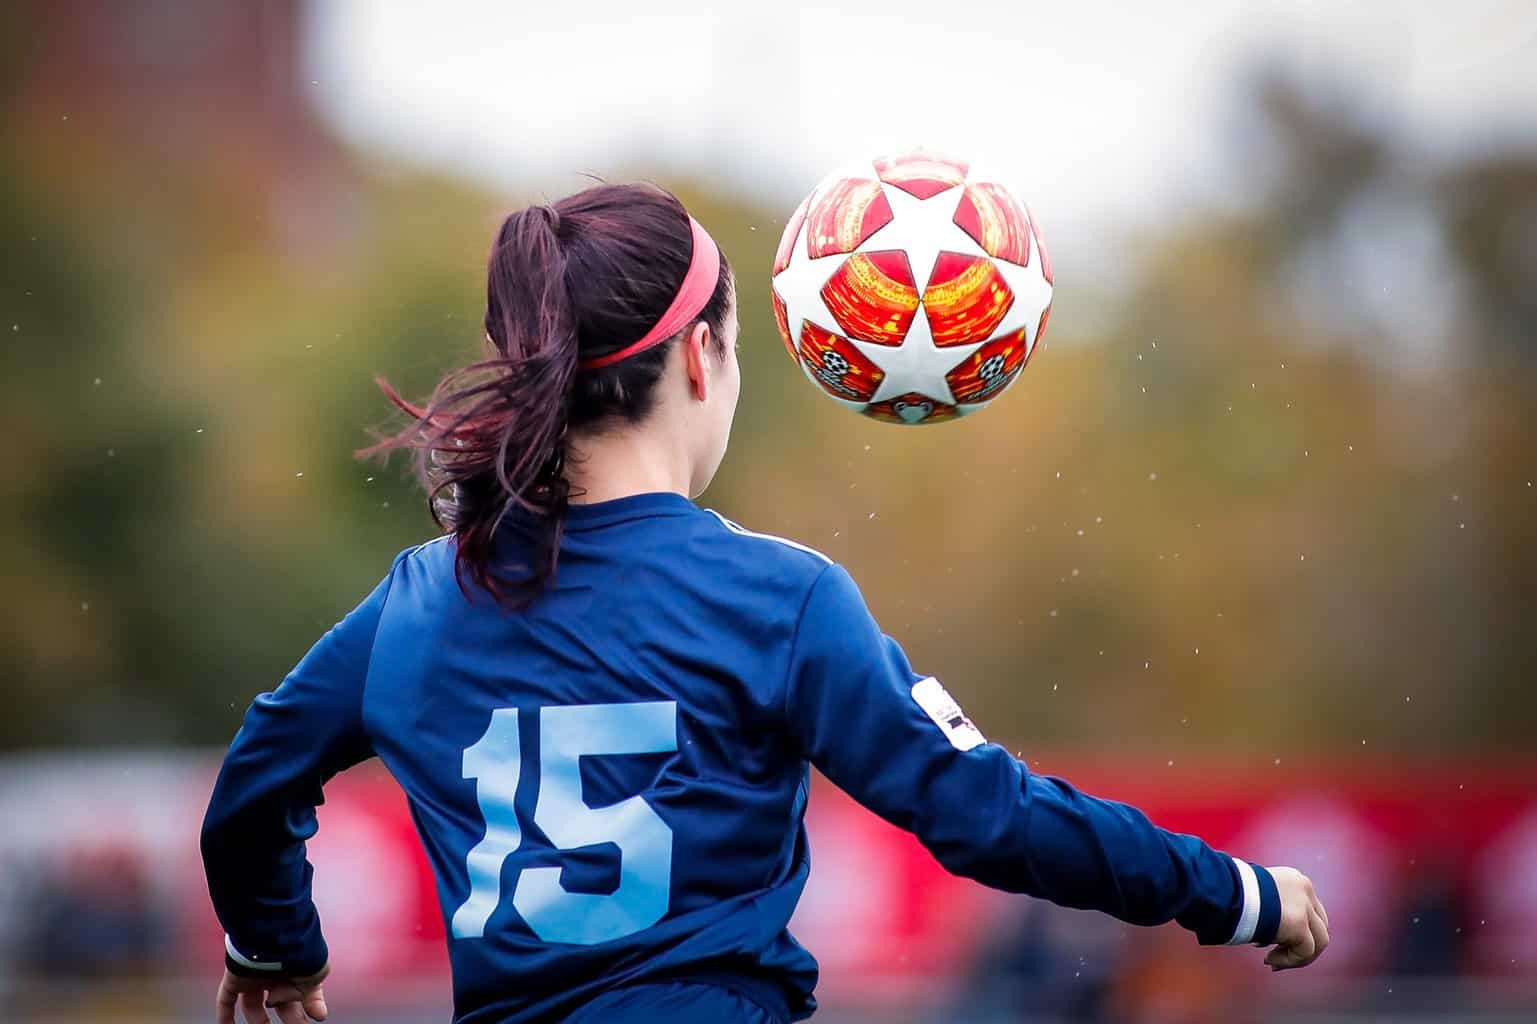 Young women with eyes focused on the soccer ball while controlling it during a girl football match.